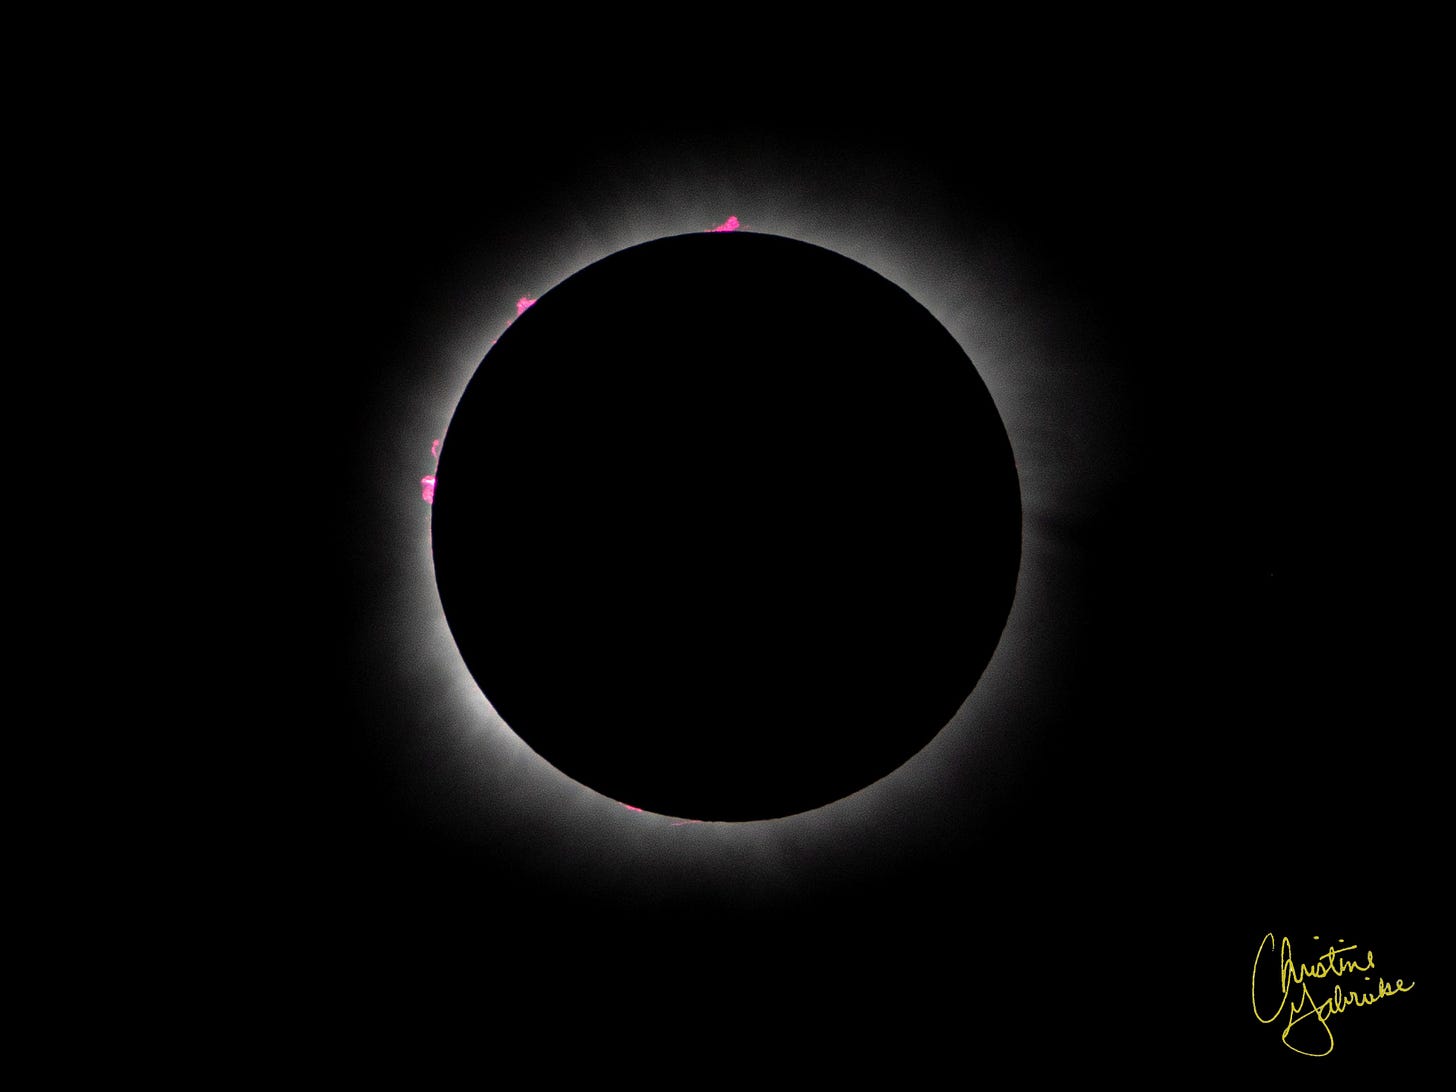 total solar eclipse with visible sunlight and plasma around the moon's edge